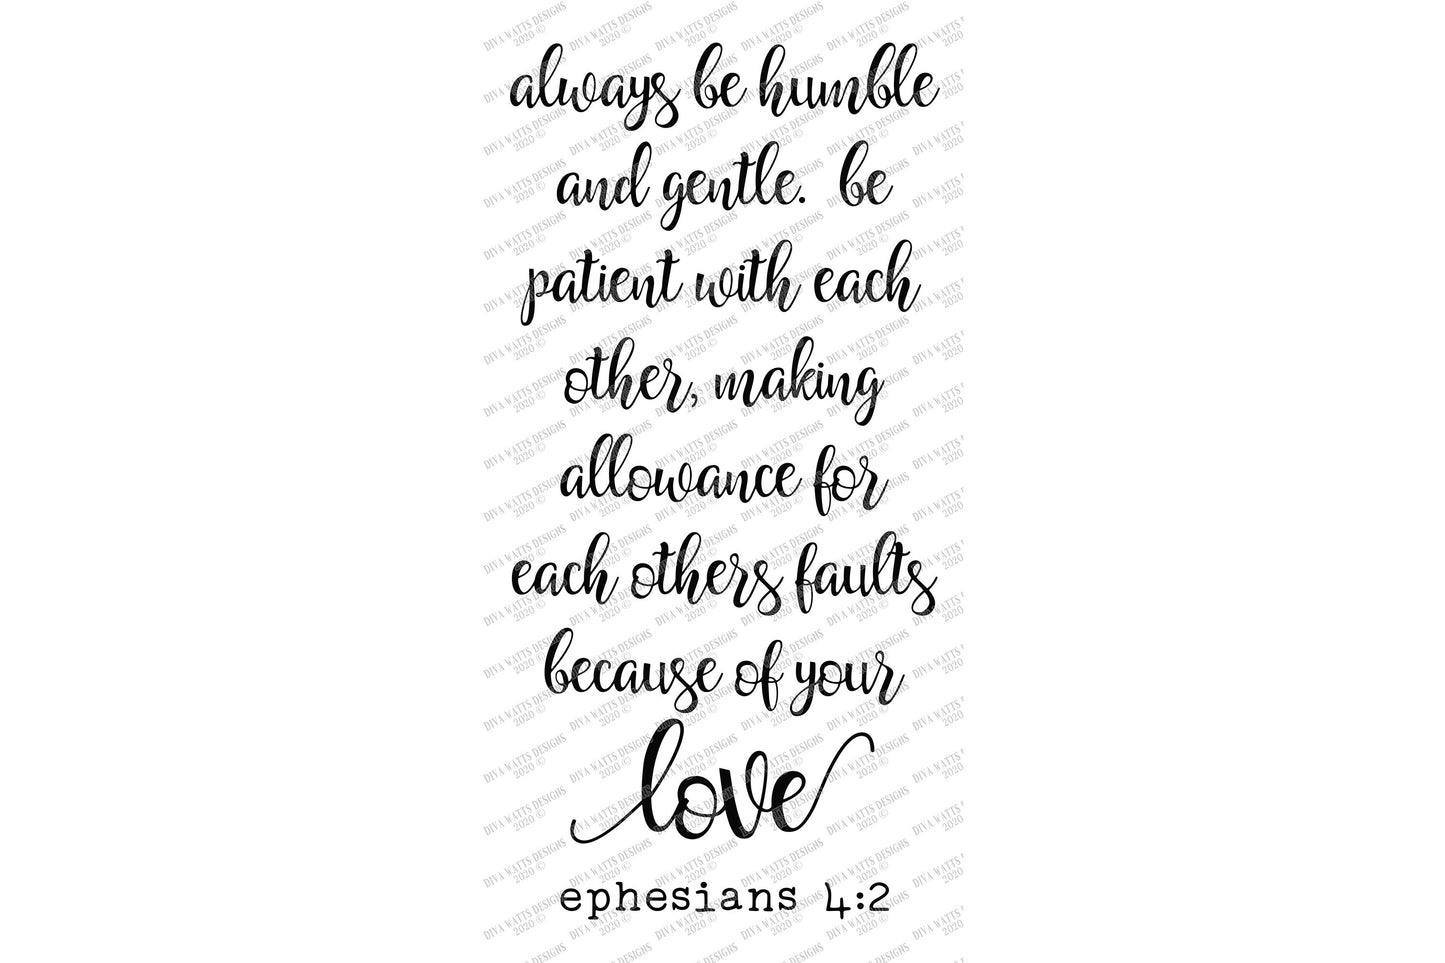 SVG Always Be Humble and Gentle Be Patient with each other Making Allowance for each others faults because of your love ephesians 4:2 | DXF